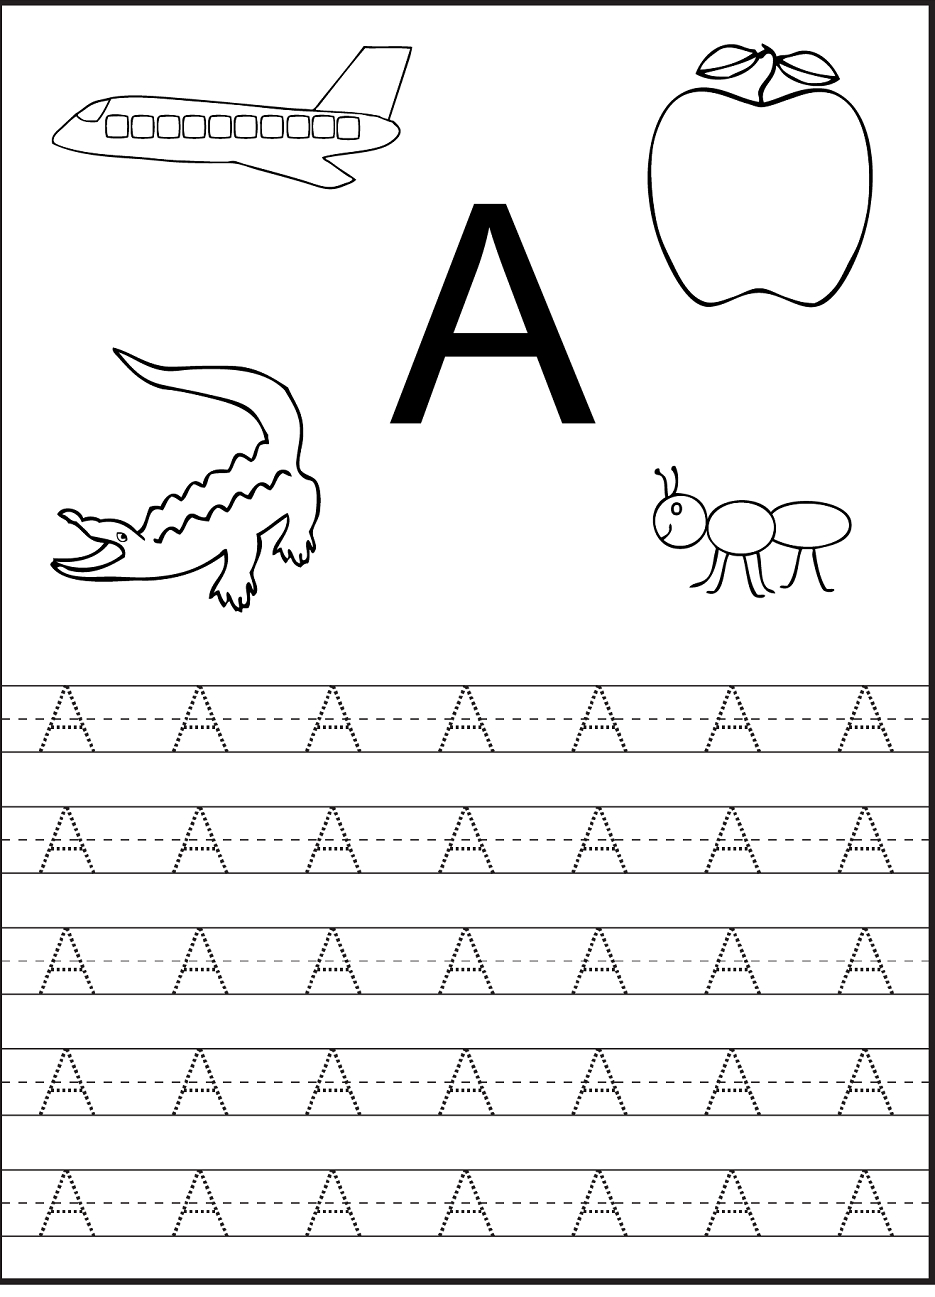 Tracing The Letter A Free Printable | Alphabet And Numbers Learning | Free Printable Preschool Worksheets Tracing Letters